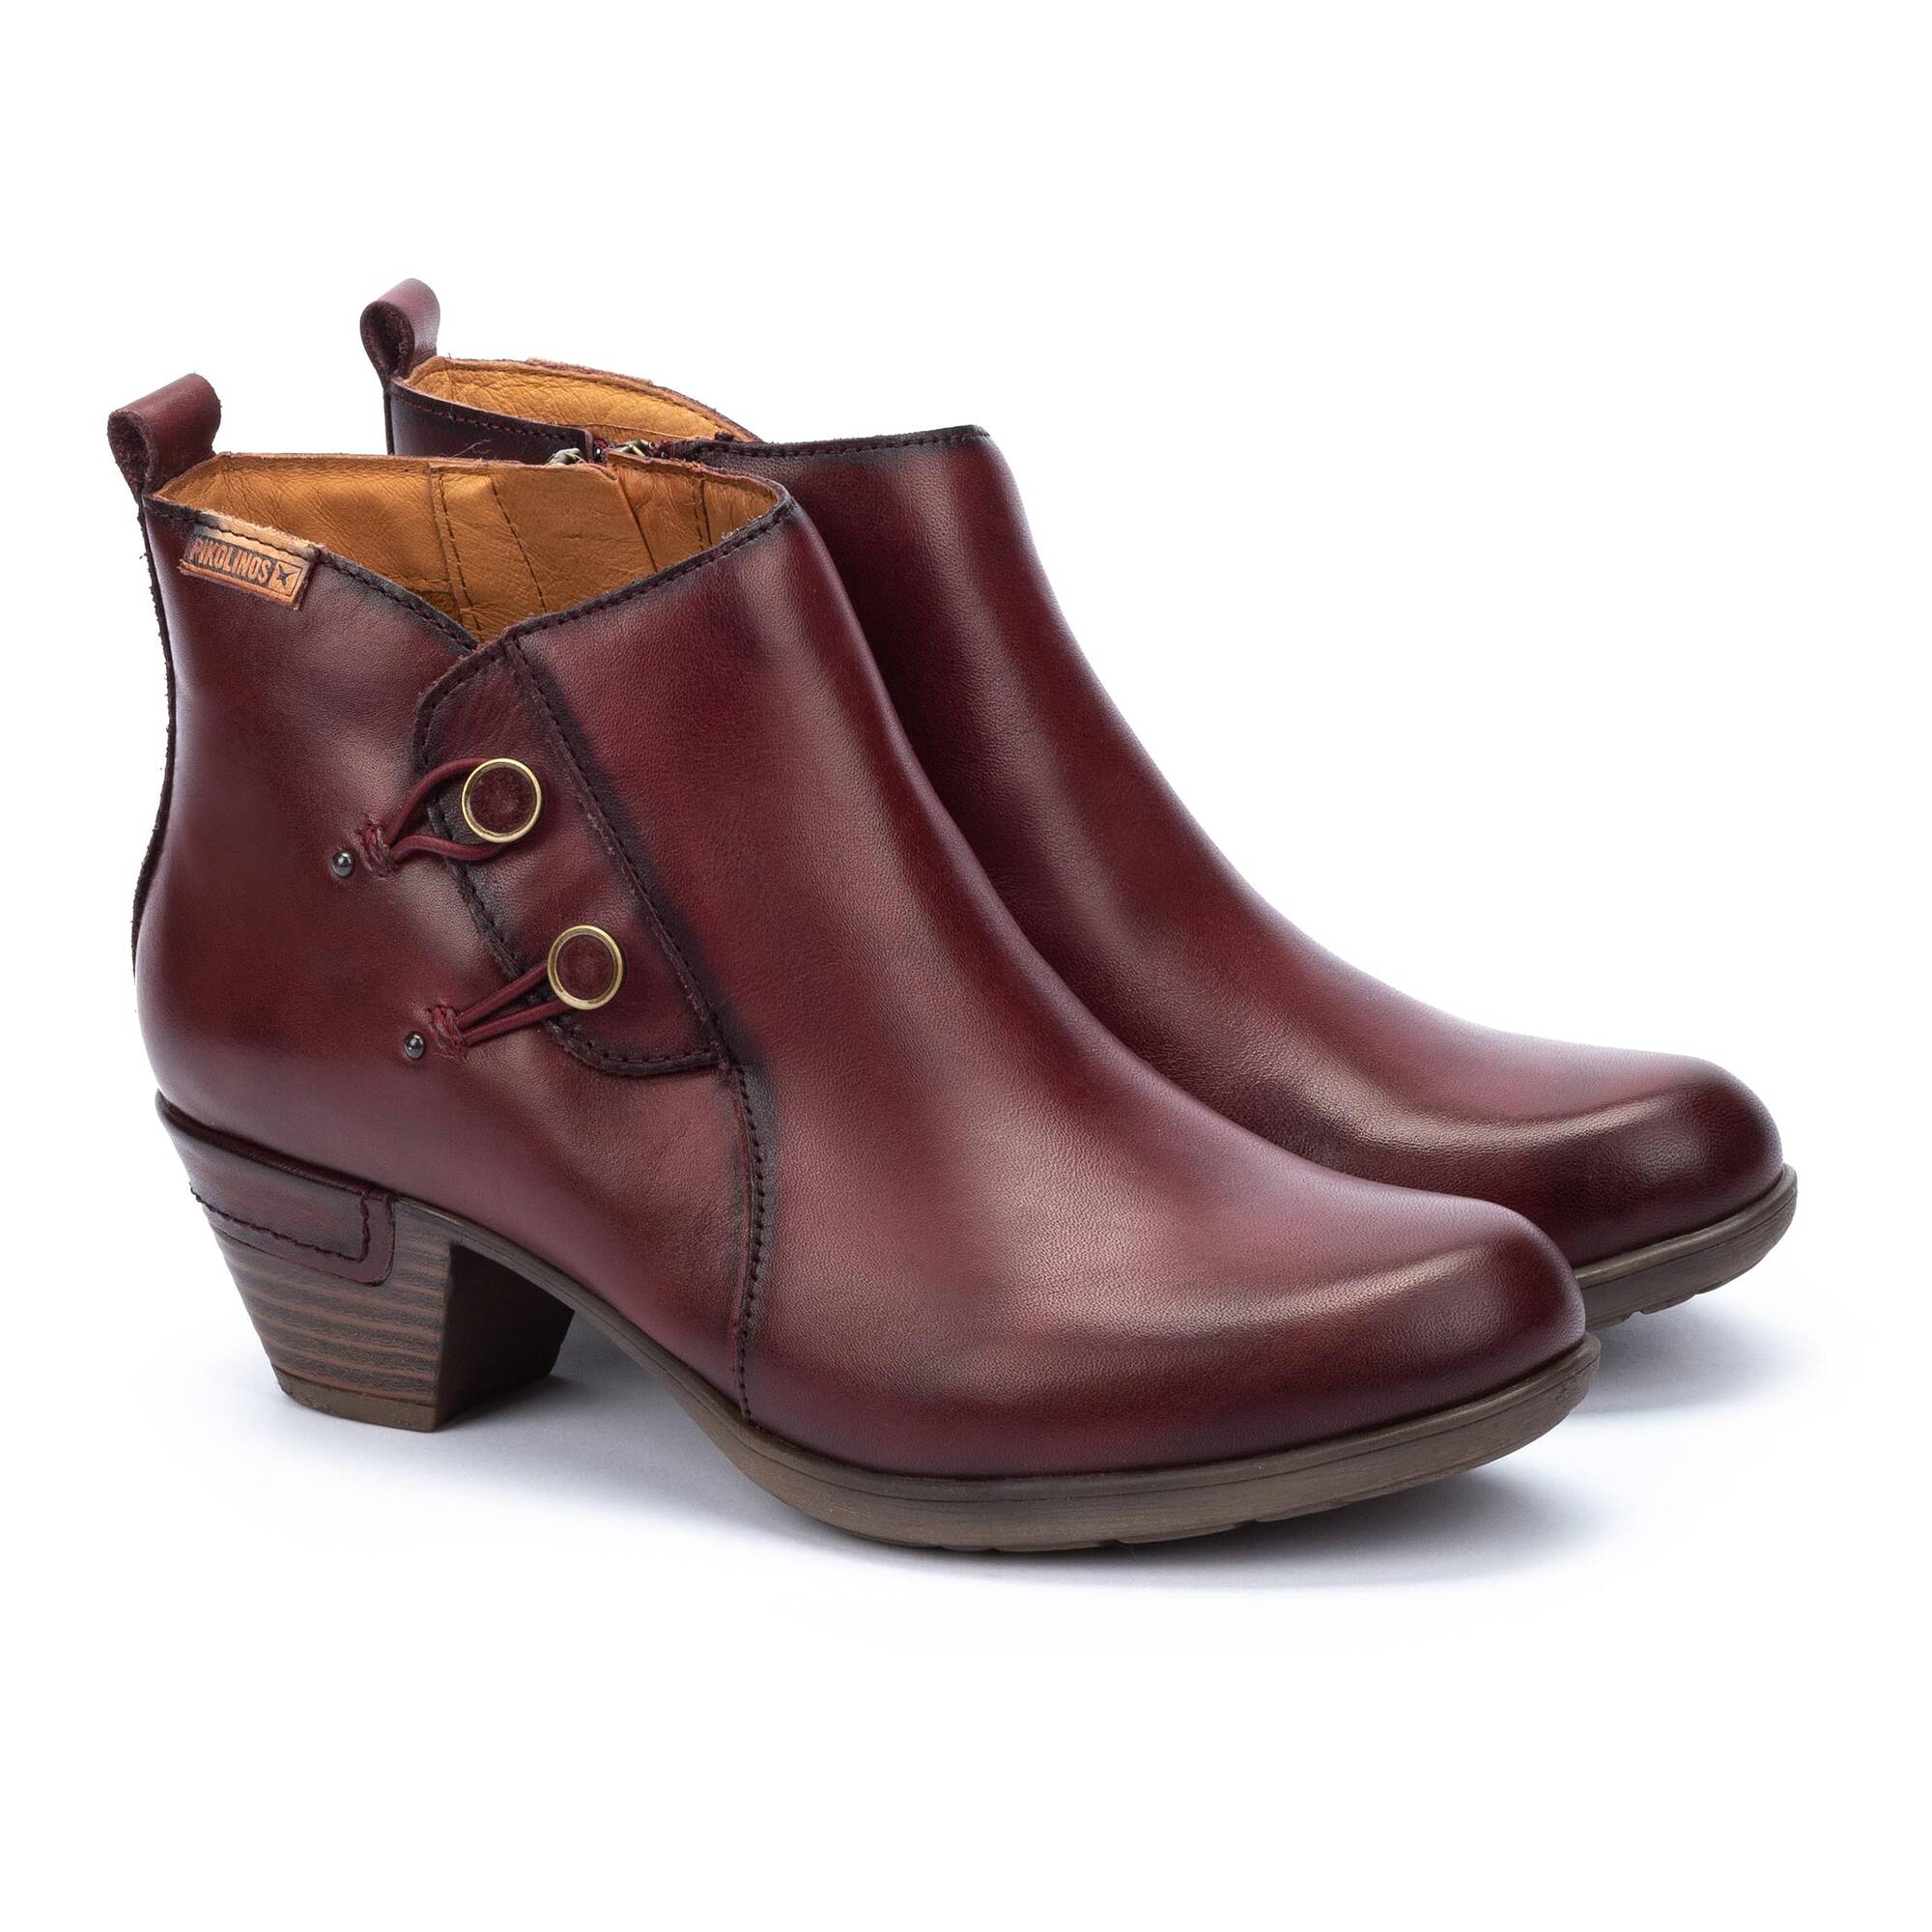 Ankle boots | ROTTERDAM 902-8947, GARNET, large image number 20 | null